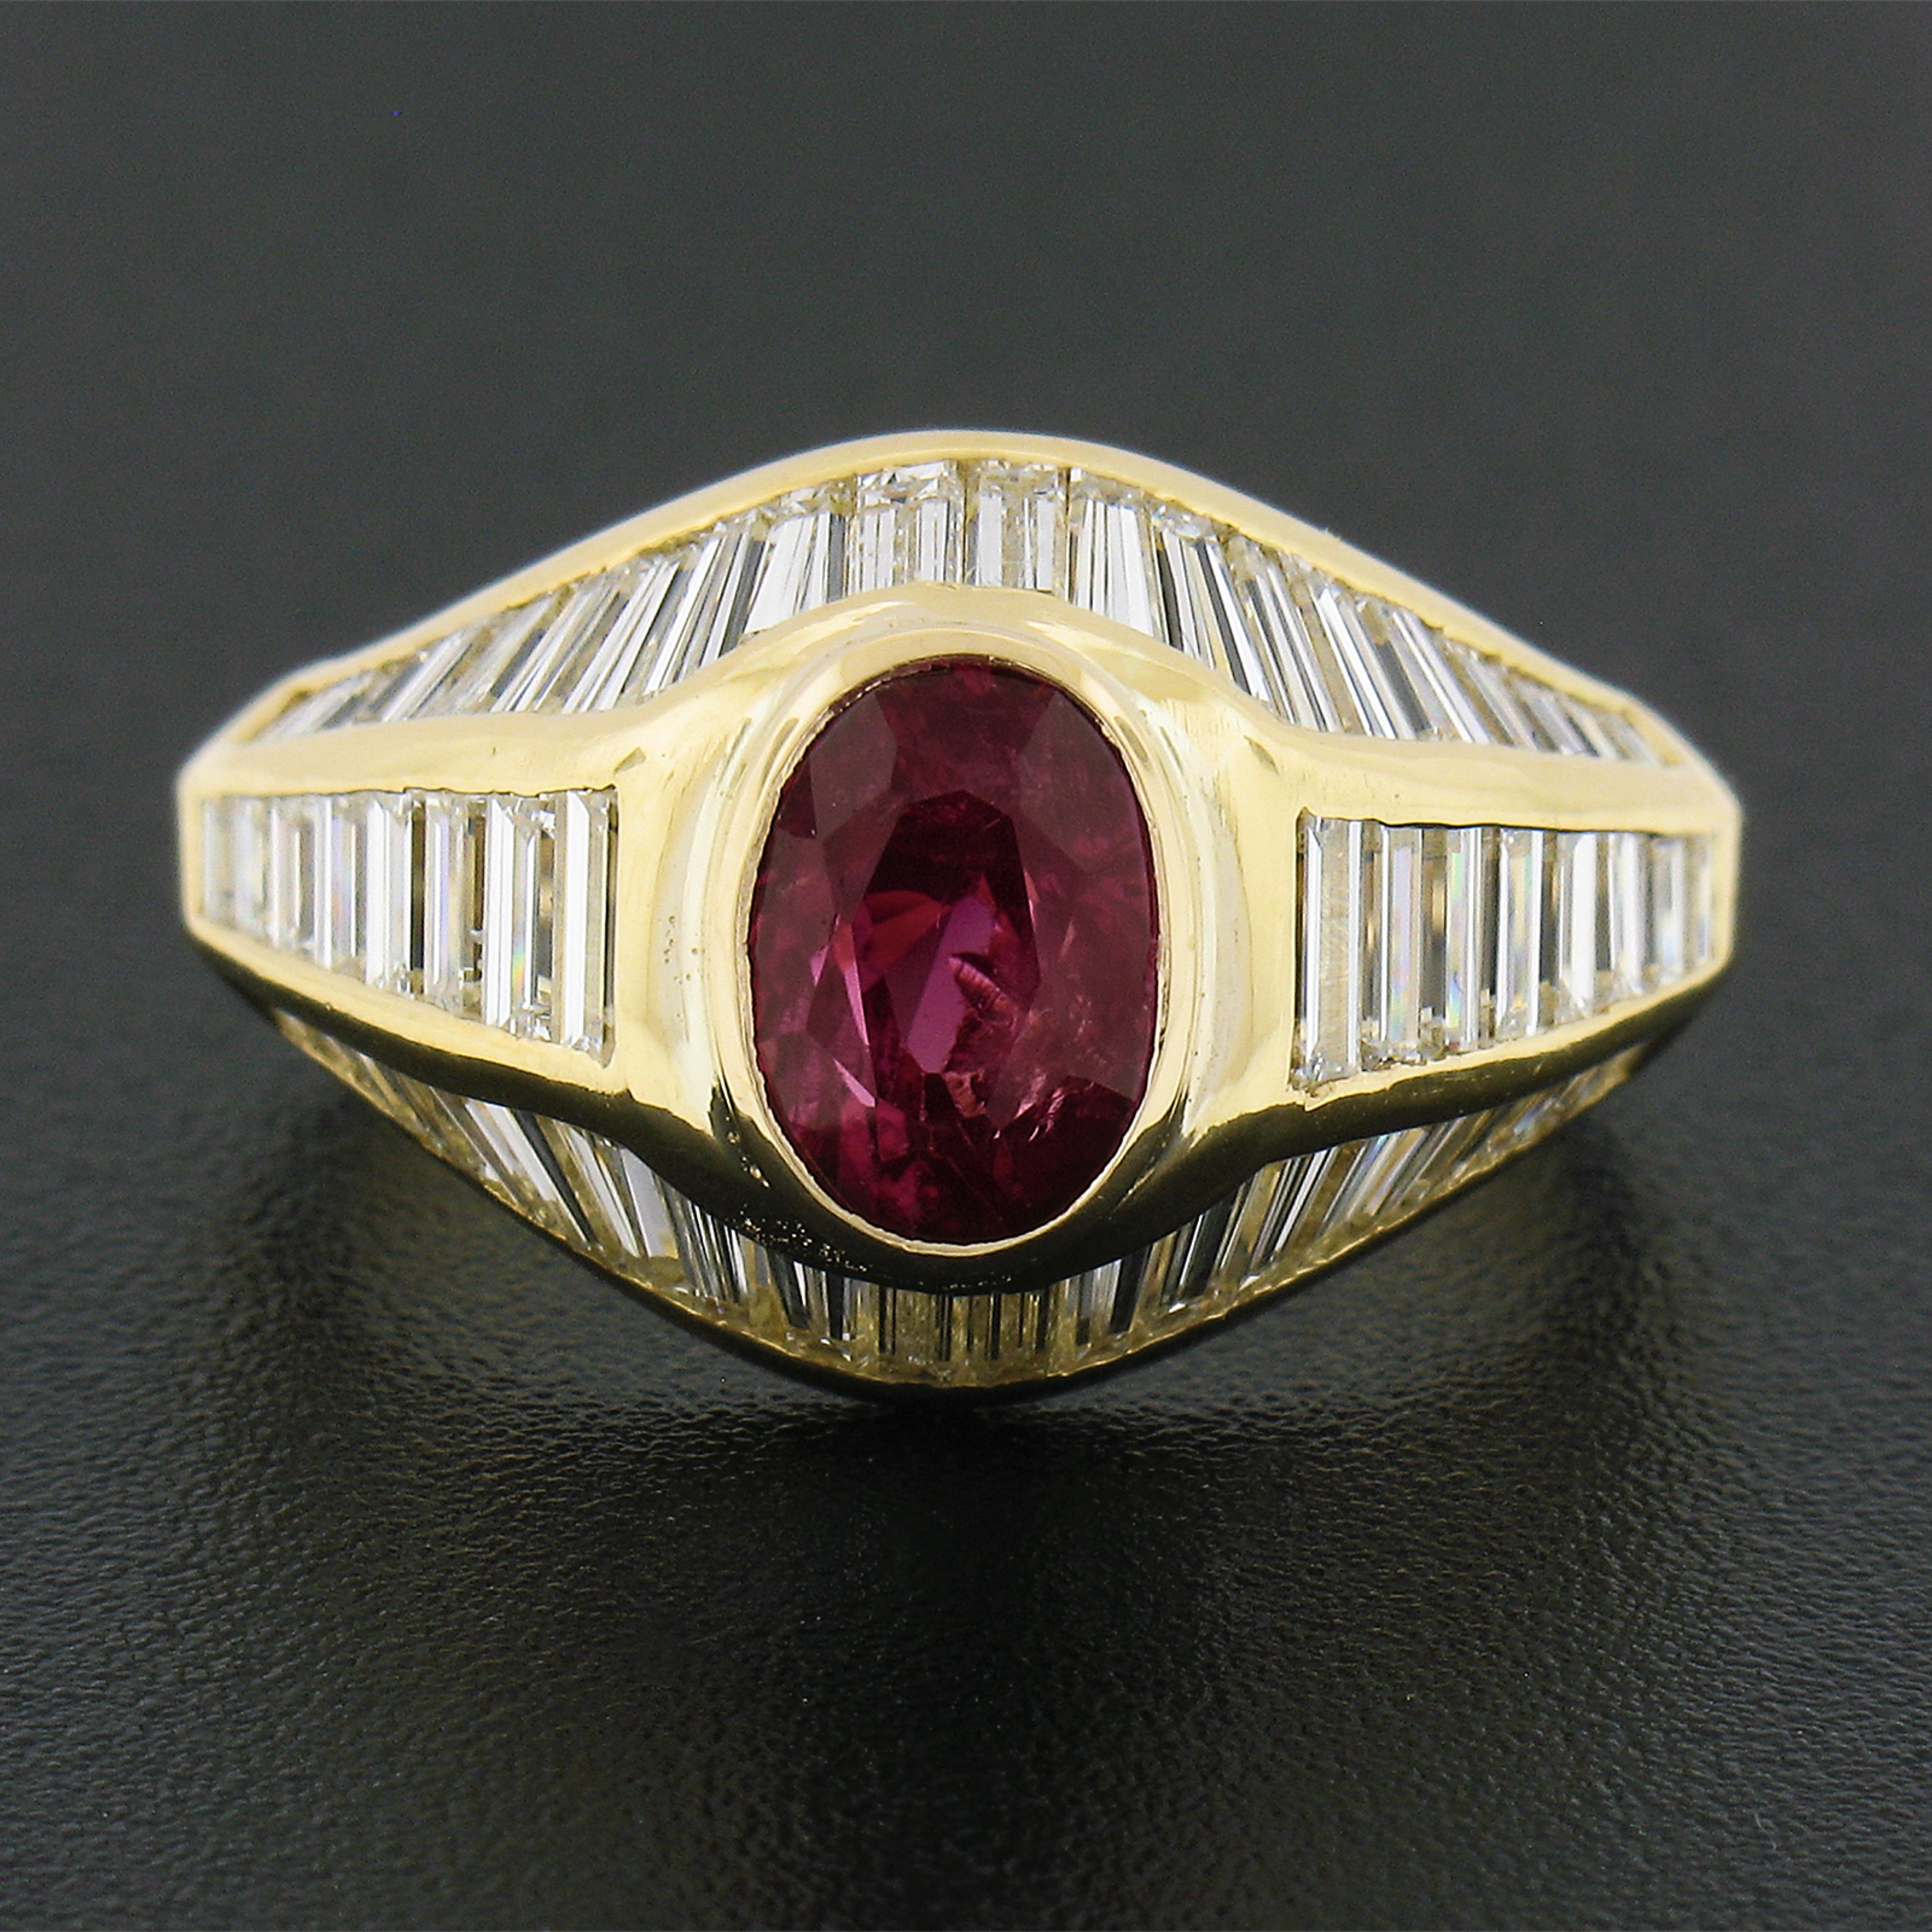 This elegantly and well refined ruby and diamond cocktail ring is crafted in solid 18k yellow gold and features a gorgeous, GIA certified, ruby solitaire neatly bezel set at the raised center. This center stone stands out with its incredible, vivid